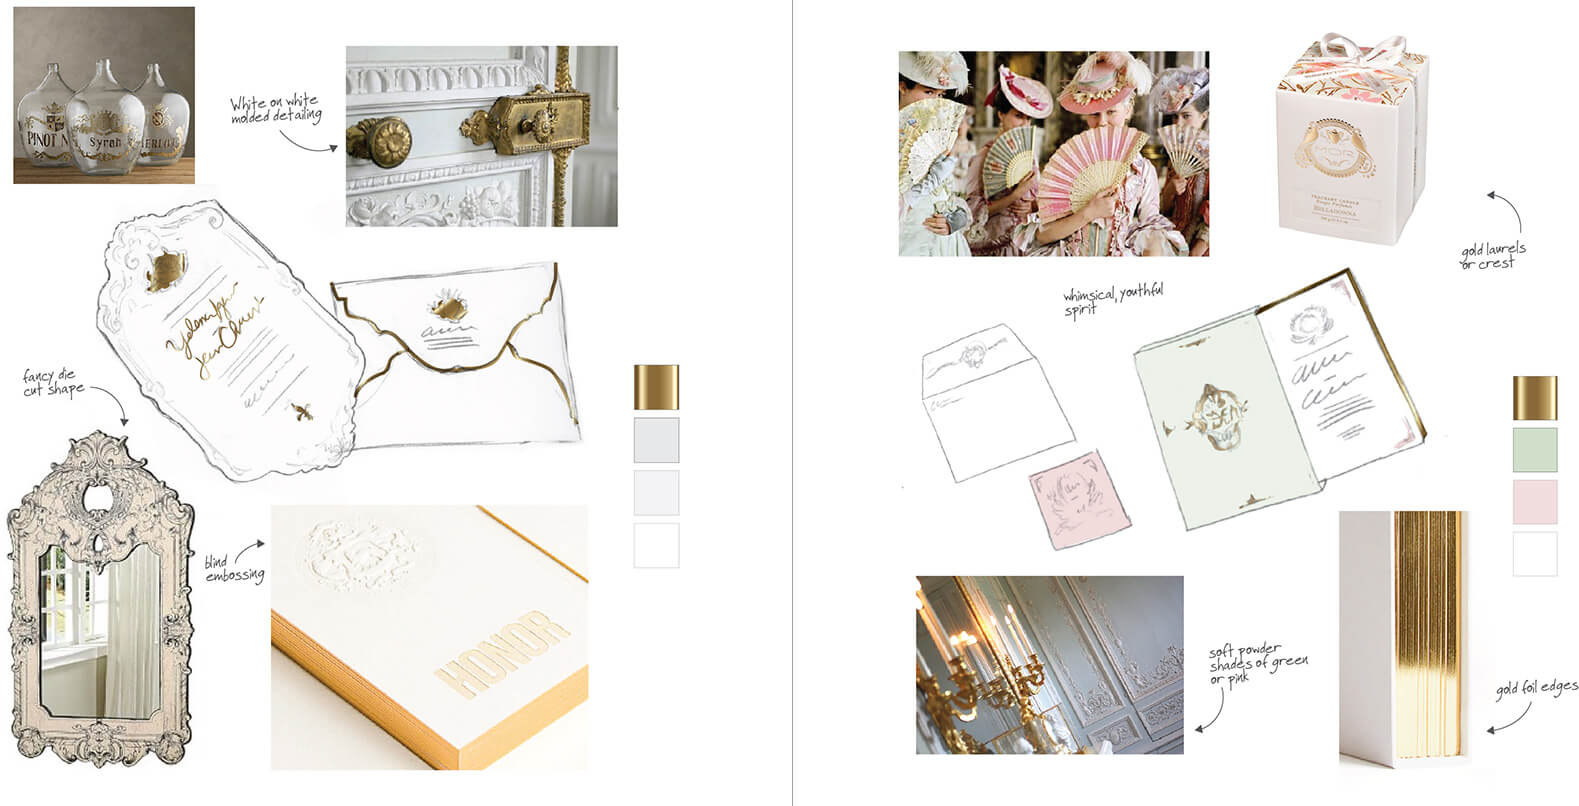 Designs incorporating La Durée and Givenchy inspiration